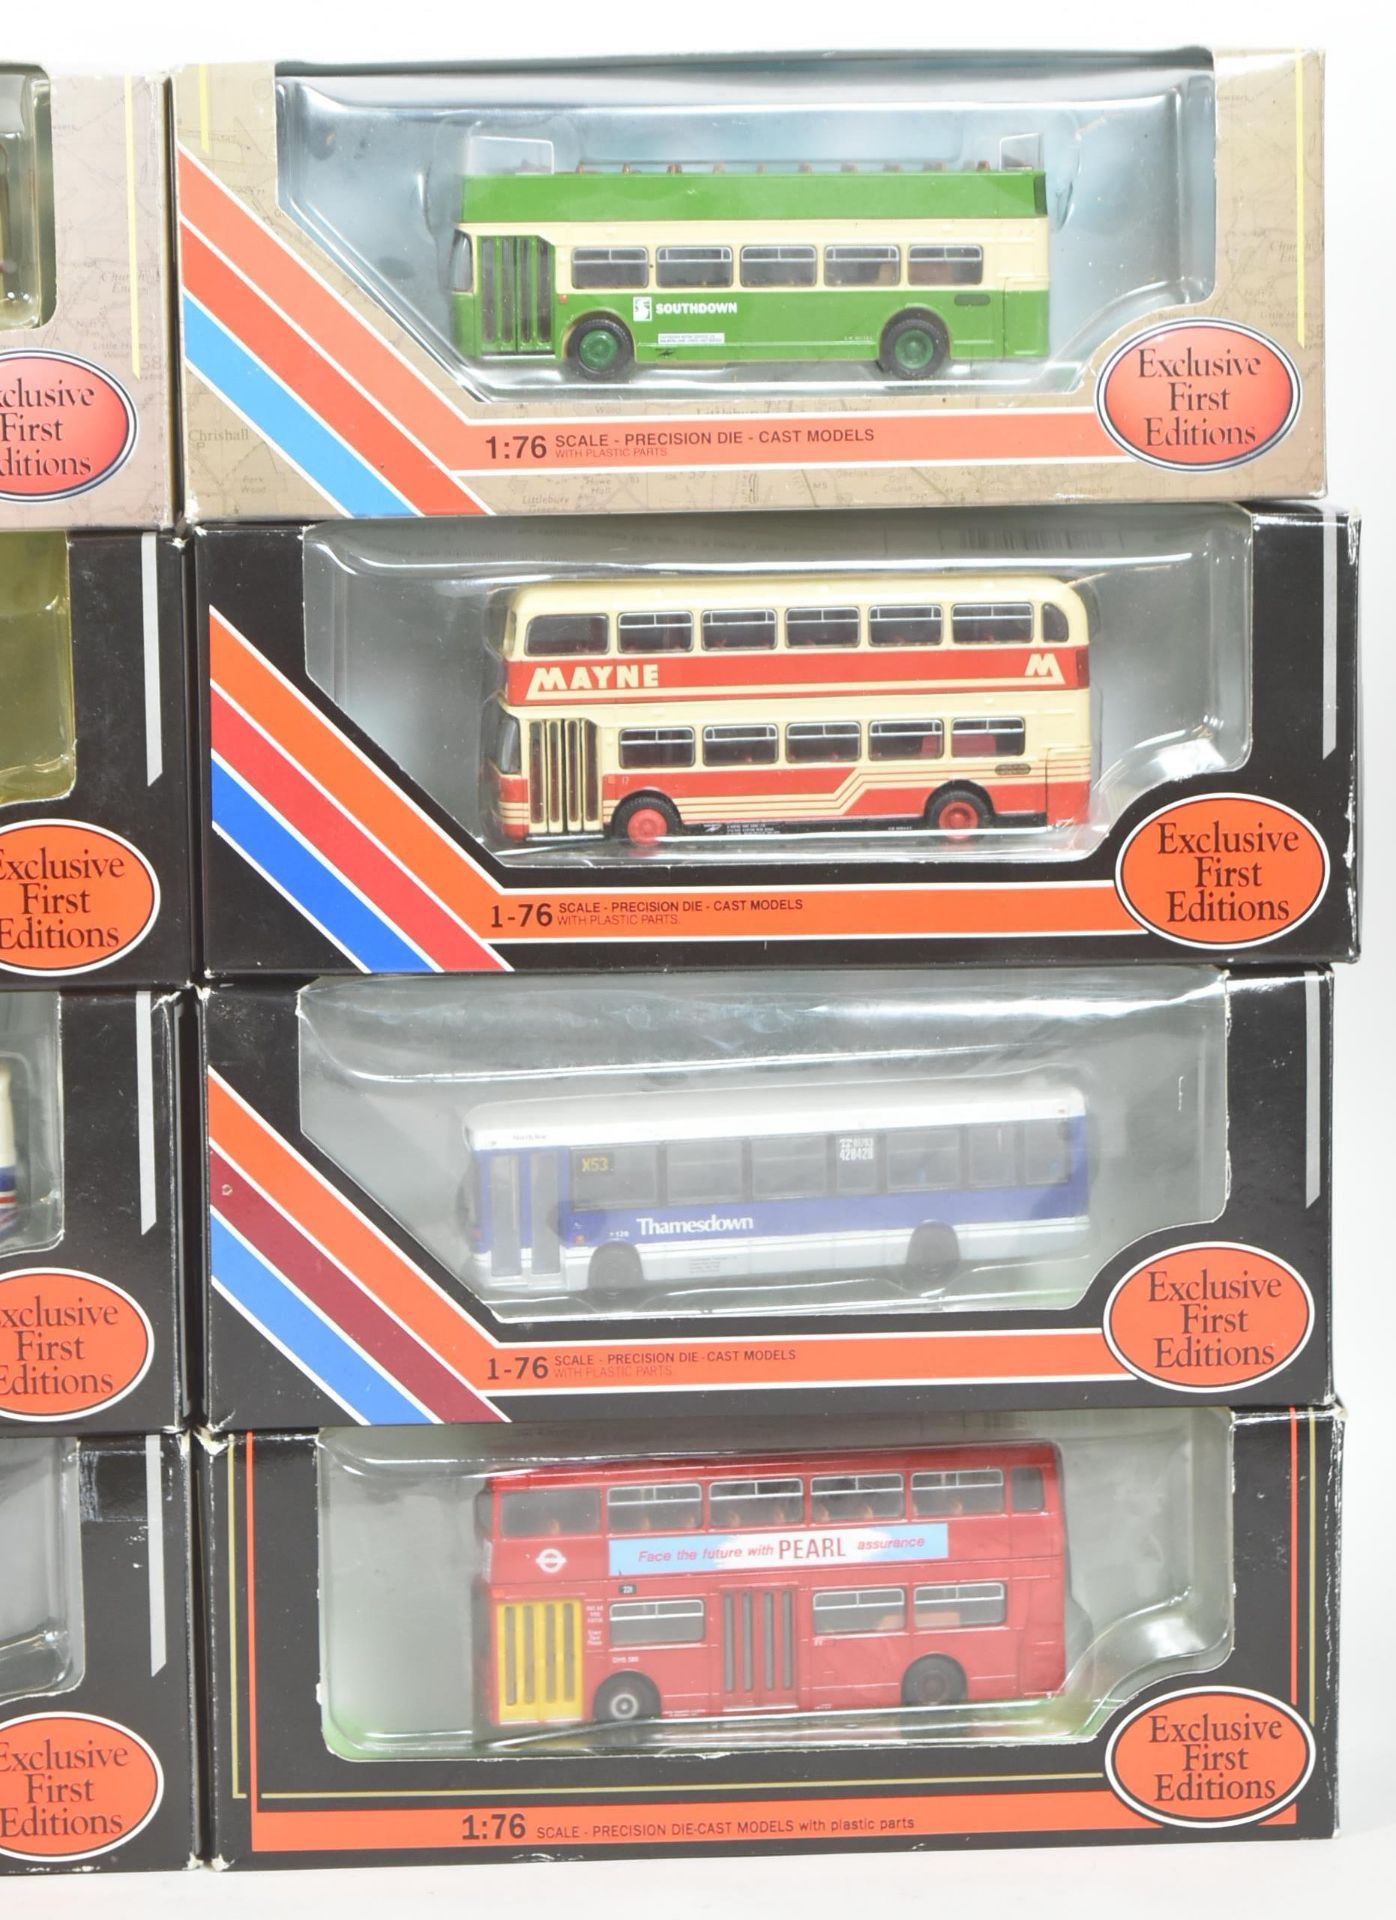 DIECAST - EFE EXCLUSIVE FIRST EDITIONS DIECAST MODEL BUSES - Image 5 of 5